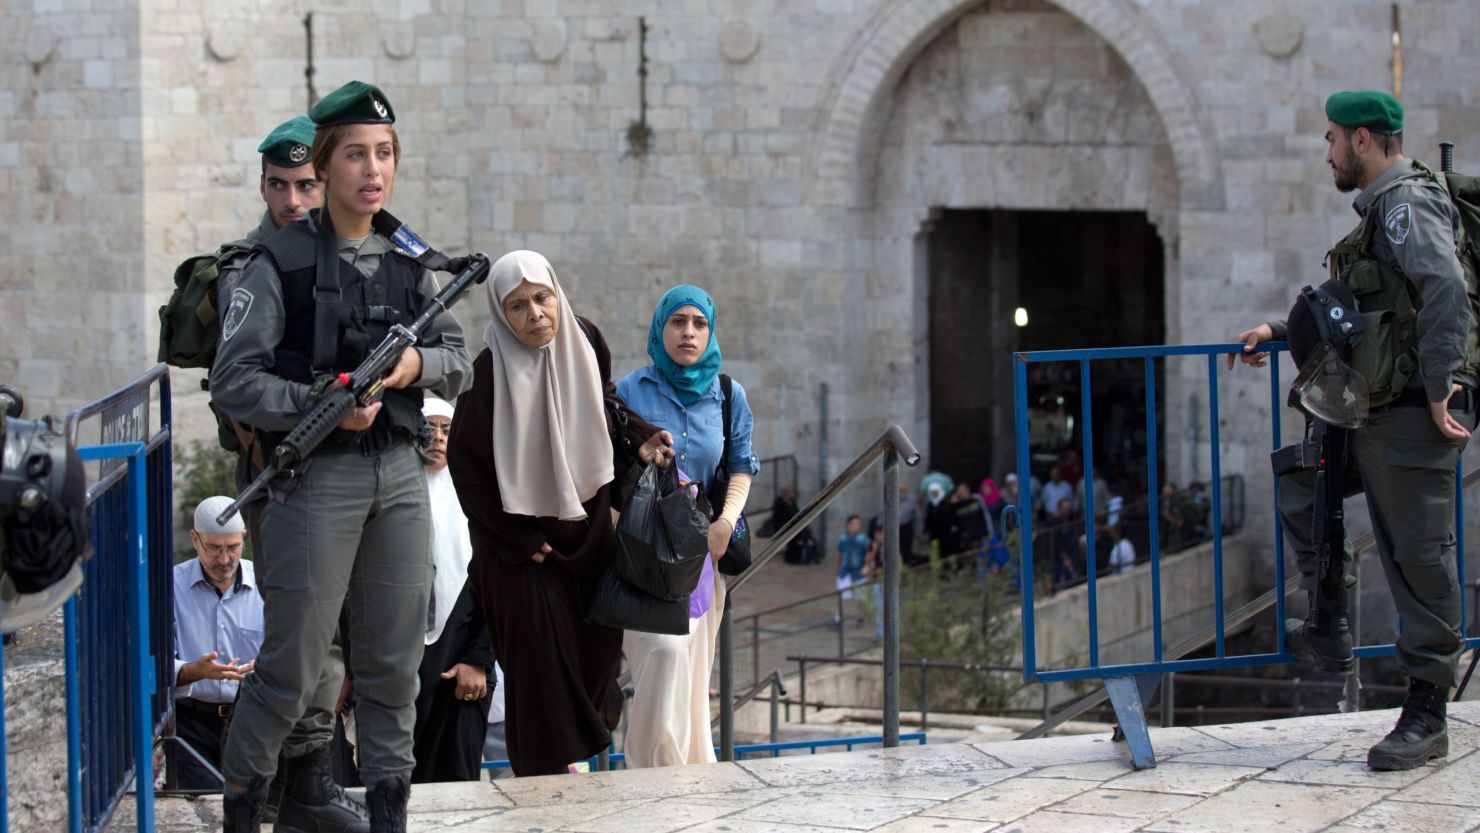 Palestinian women walk past Israeli border police at the Damascus Gate at the entrance of the Old City in East Jerusalem in 2015.